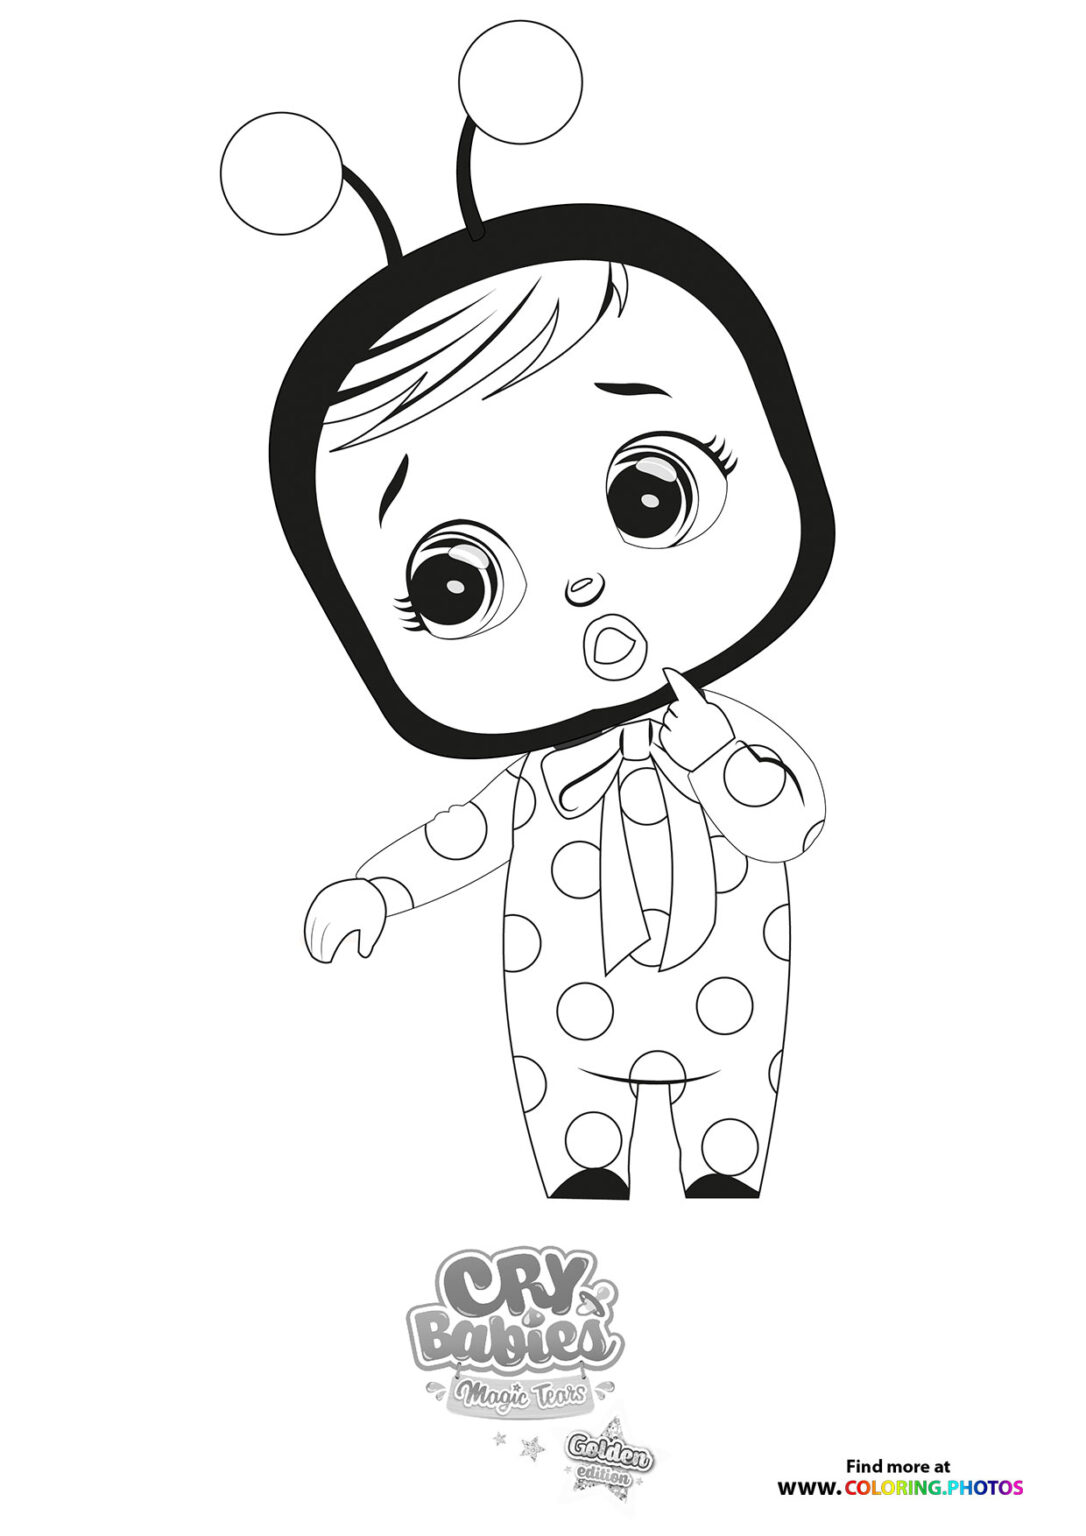 Lady - Cry Babies - Gold Edition - Coloring Pages for kids